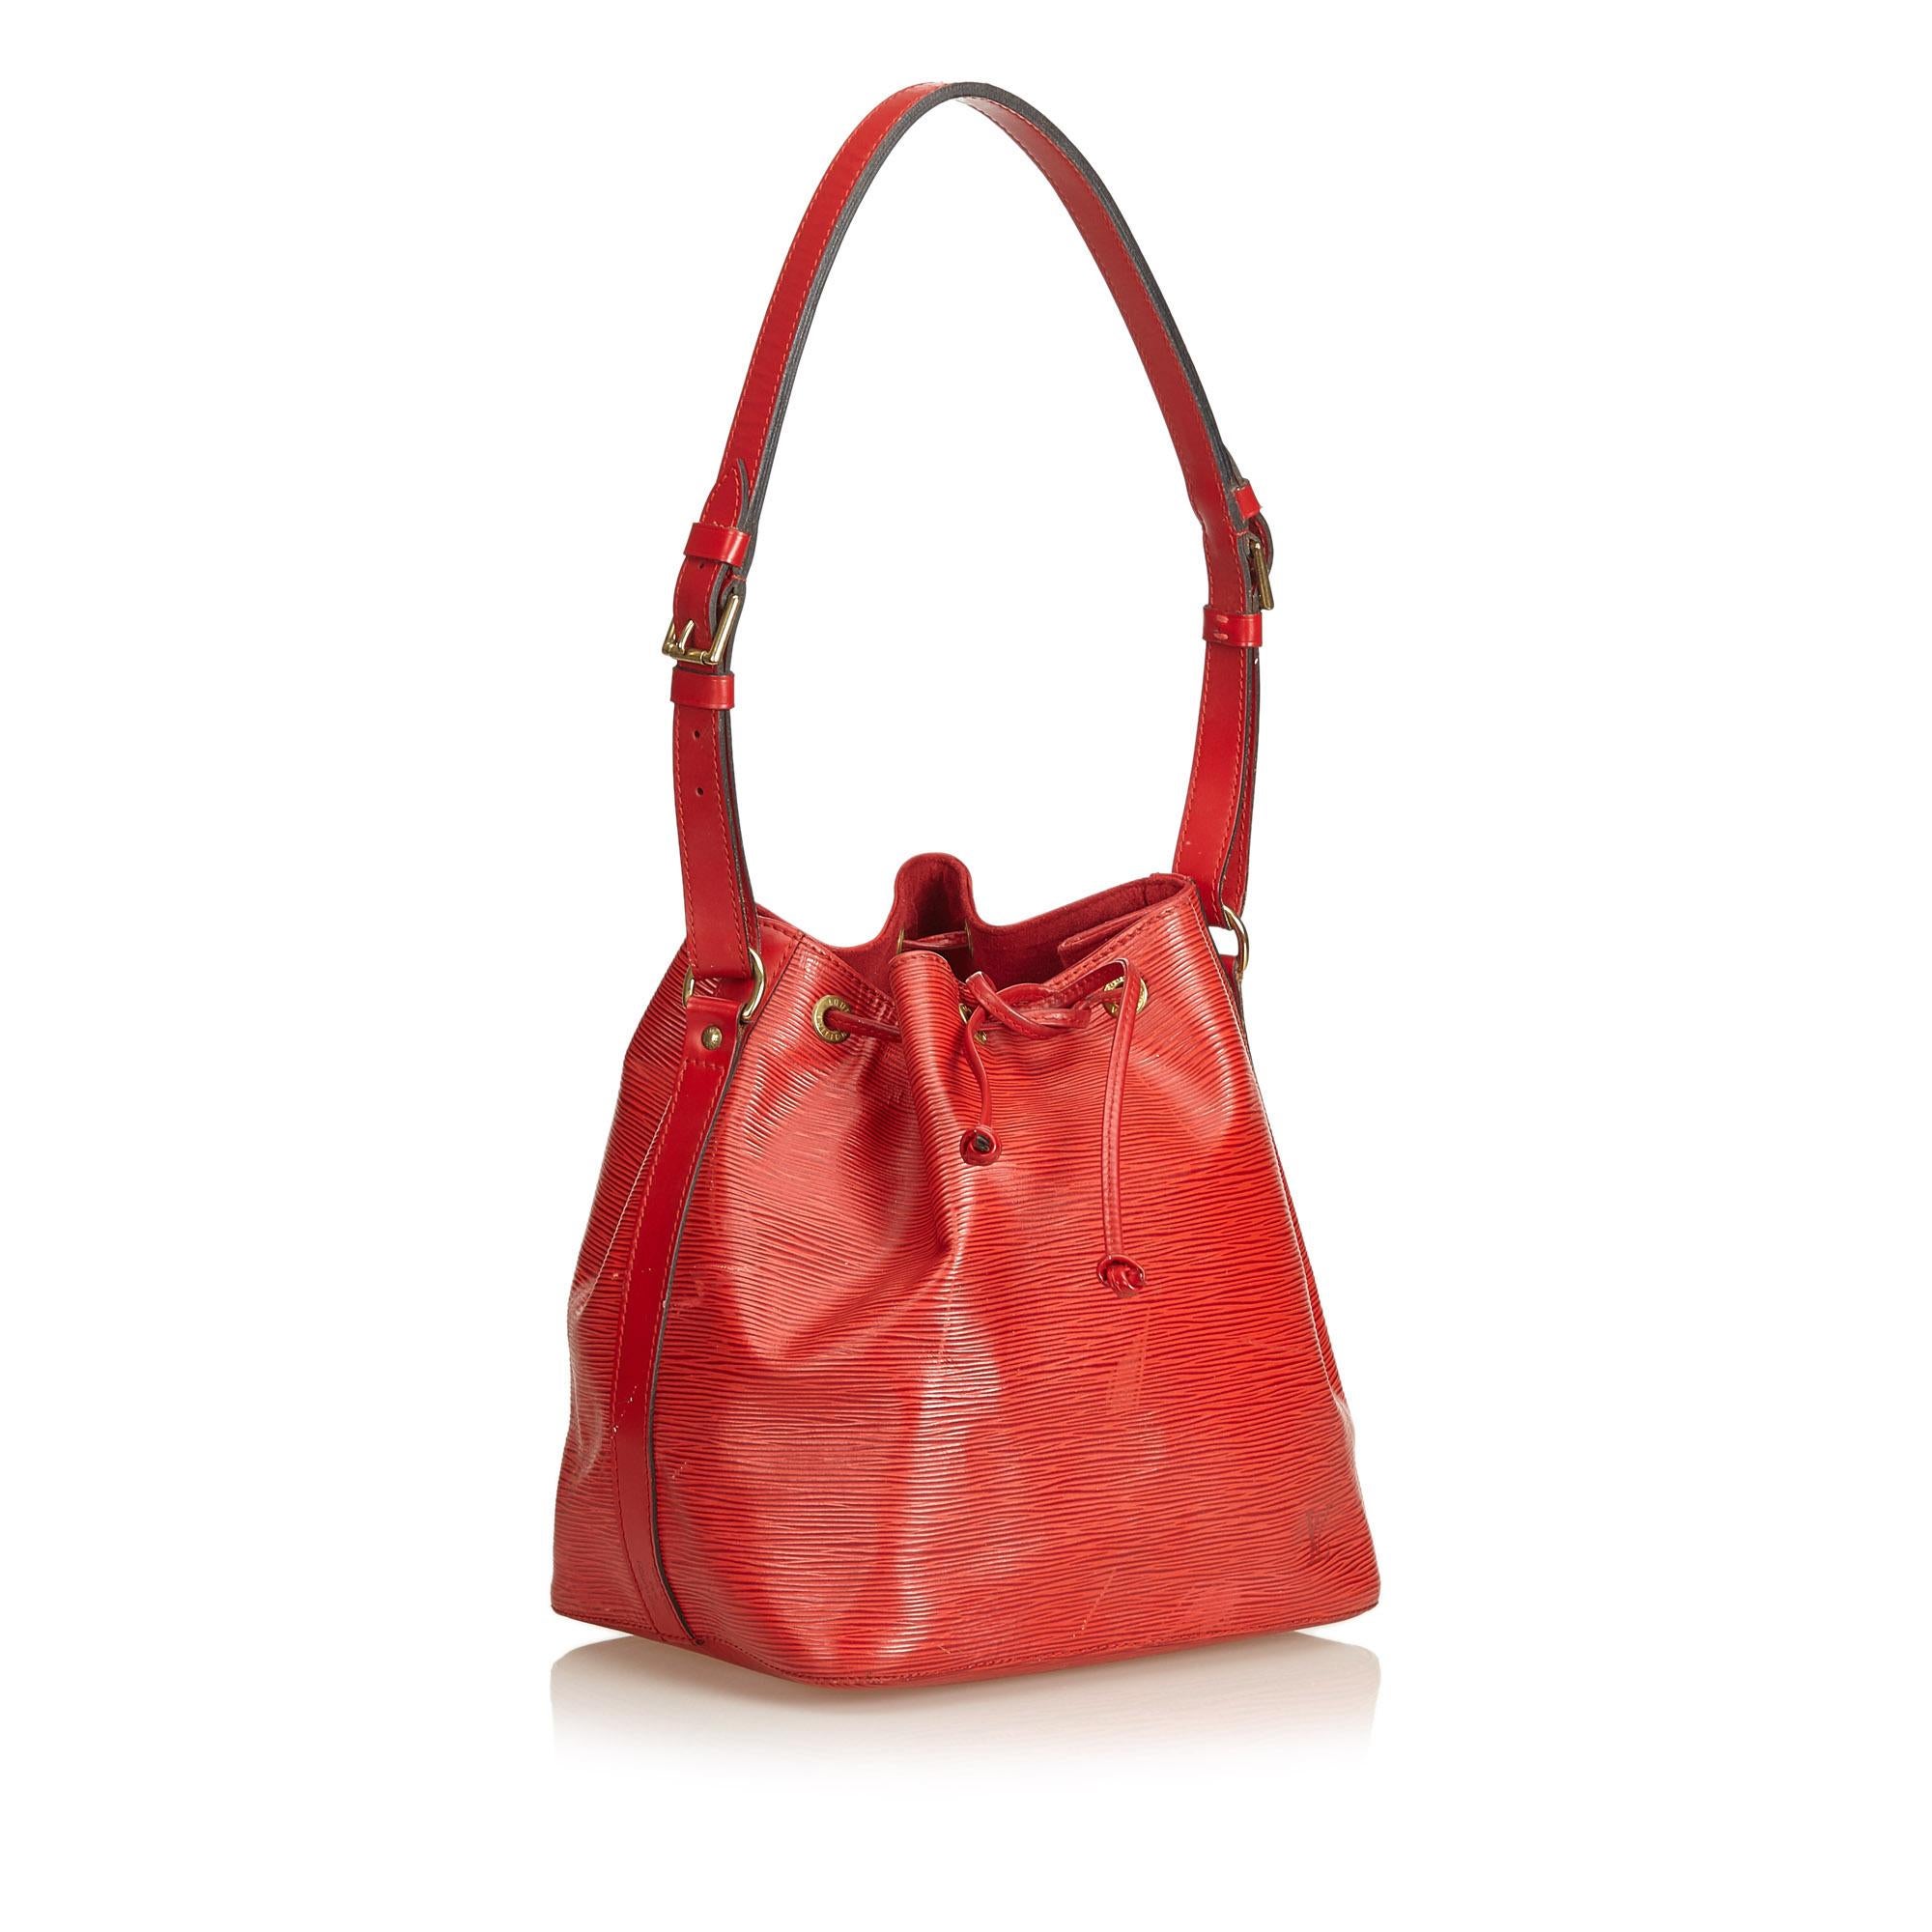 The Louis Vuitton Noe is a sweet bucket bag featuring a rich red epi leather body, adjustable flat strap, open top with a drawstring closure, and Alcantara lining.

Strap drop: 28cm.
Serial number: AR1905